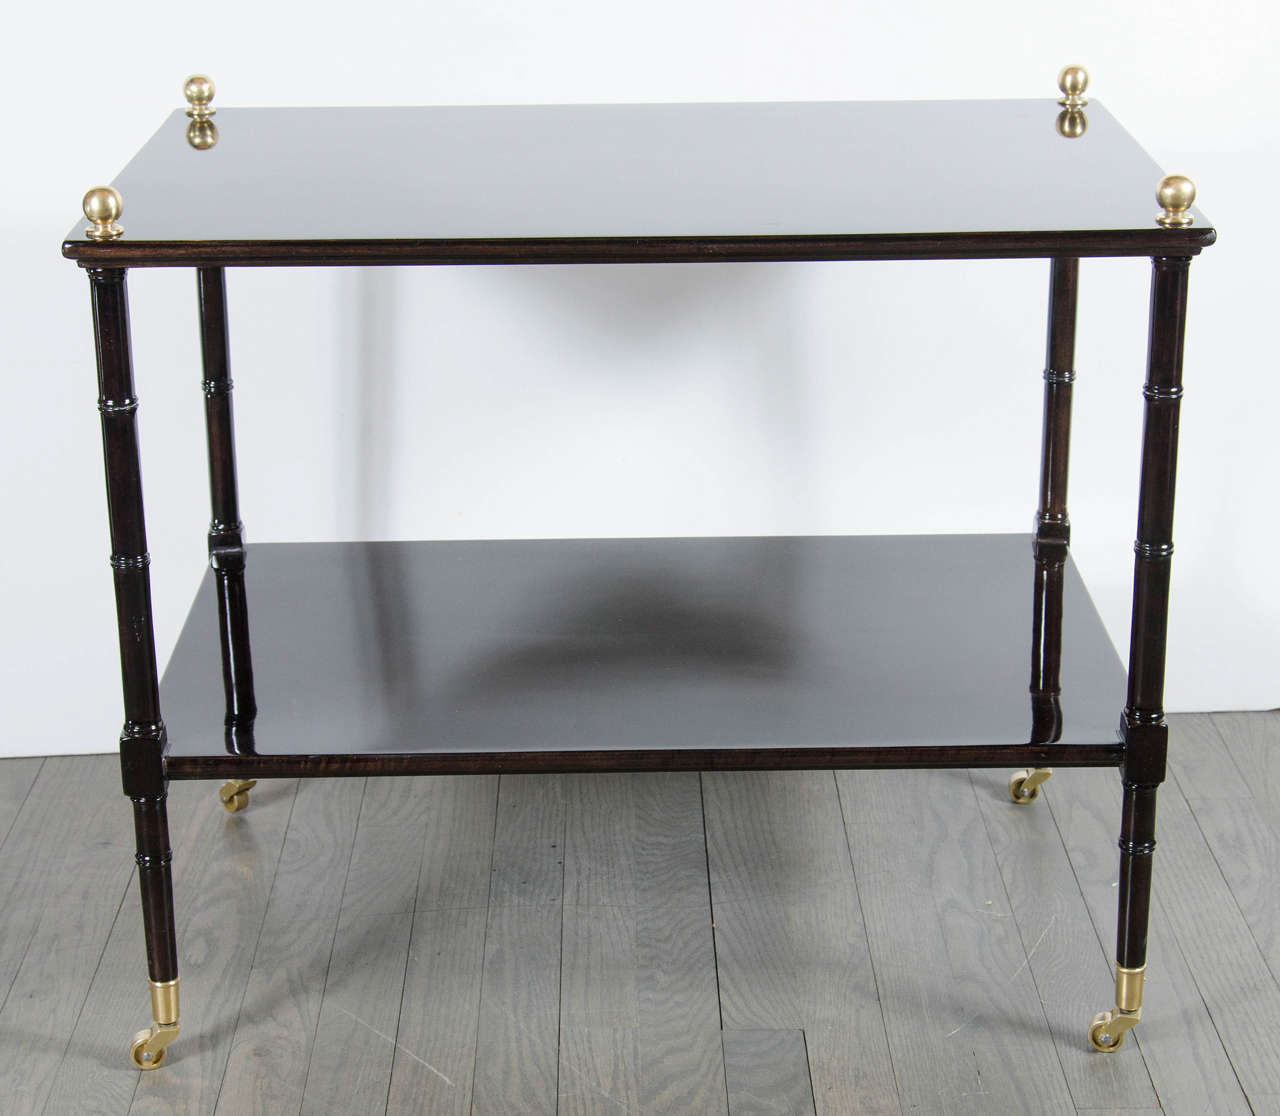 This refined Mid-Century Modern two-tier occasional table was realized in the United States, circa 1960. It features stylized and banded balustrade form legs and two rectangular tops in ebonized walnut with a custom glass top, as well as brass ball